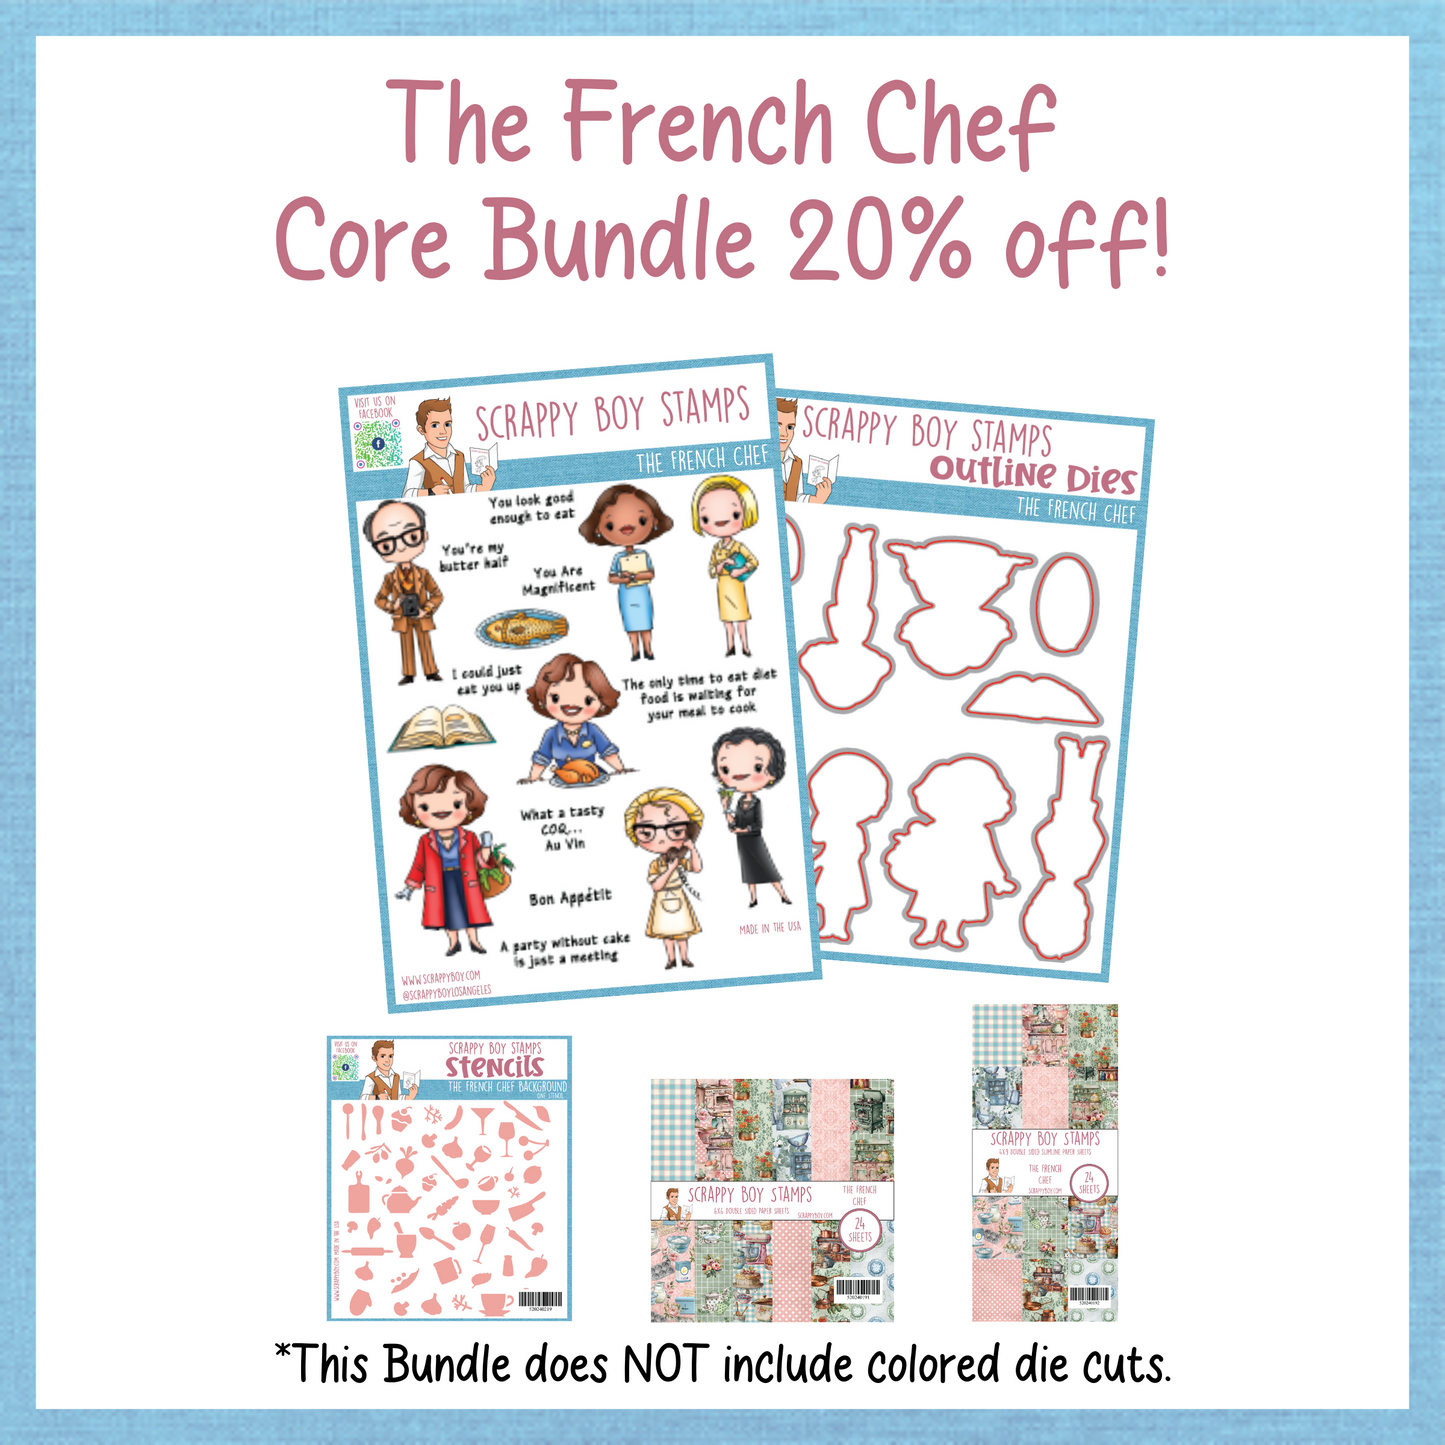 Core Bundle - The French Chef Release Scrappy Boy Stamps